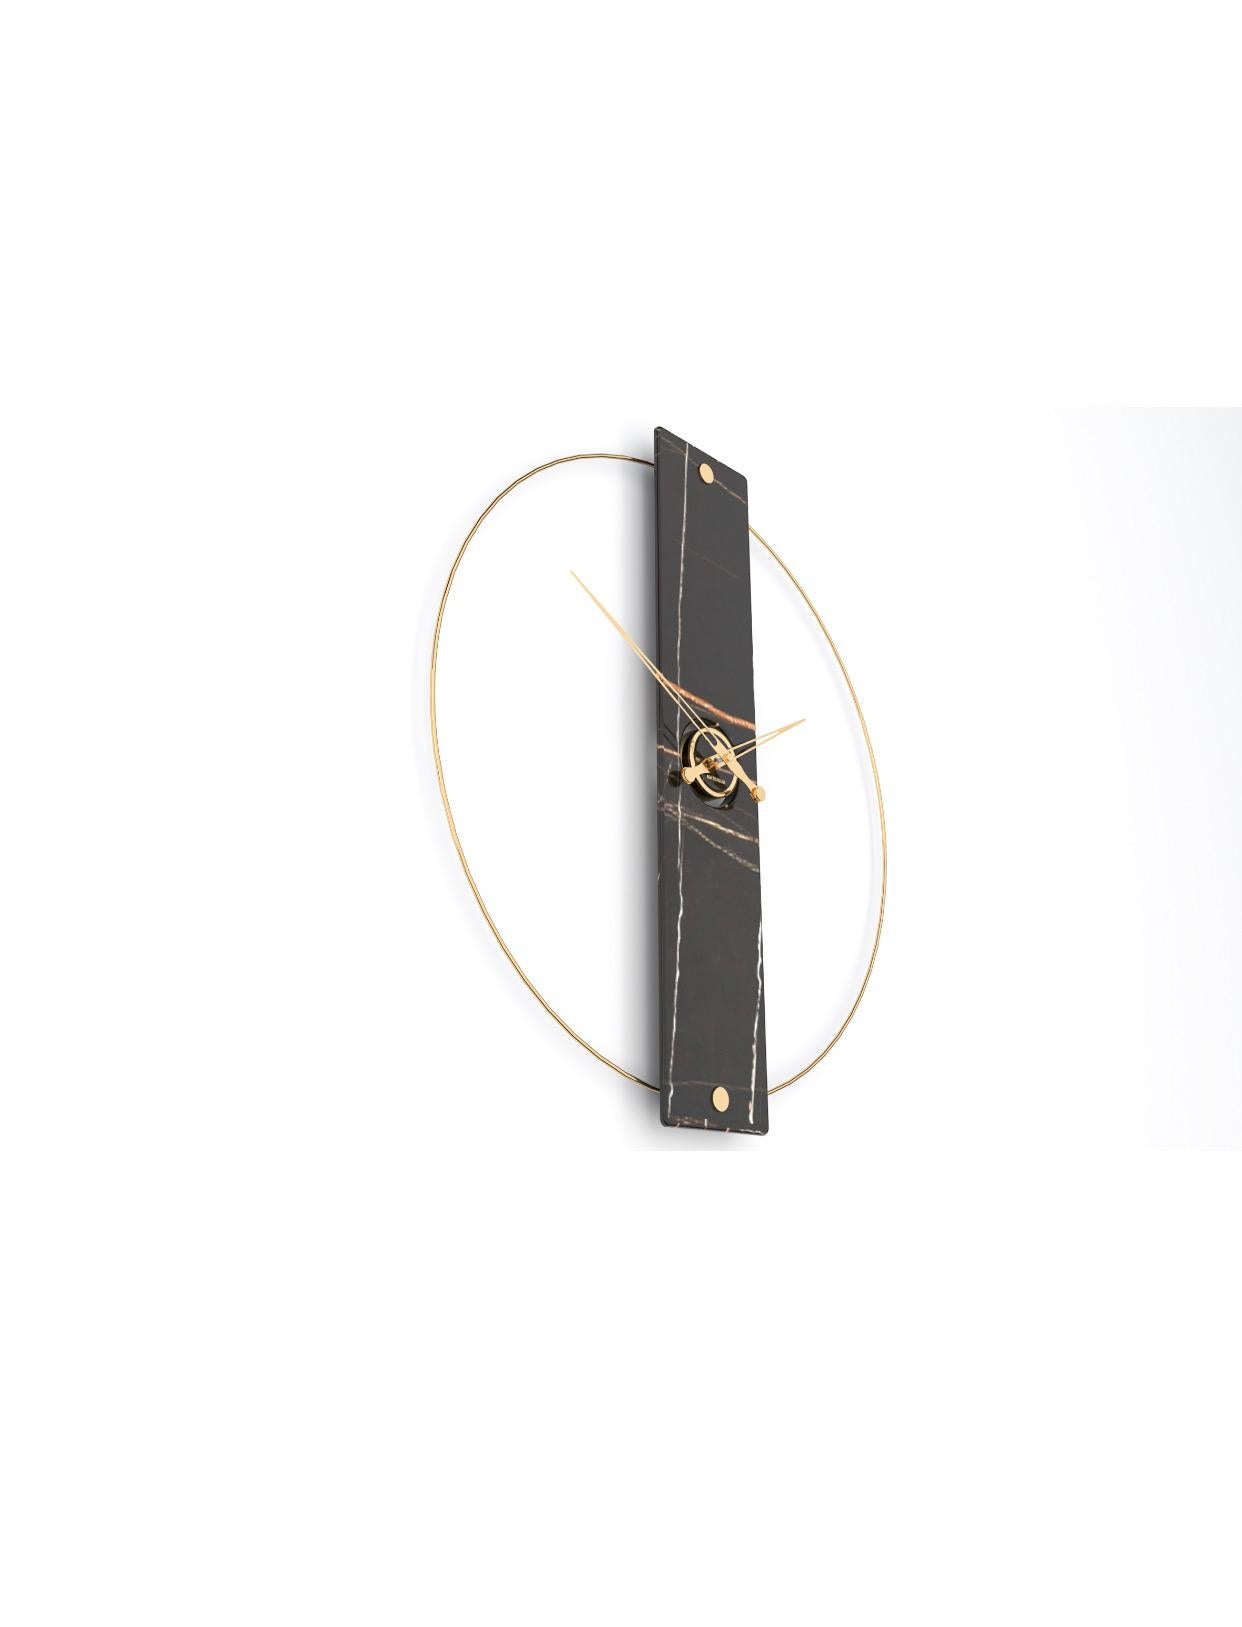 Contemporary Sculptural Clock 2019 with Black Sarah Noir Marble and Finishes in 24-Karat Gold For Sale